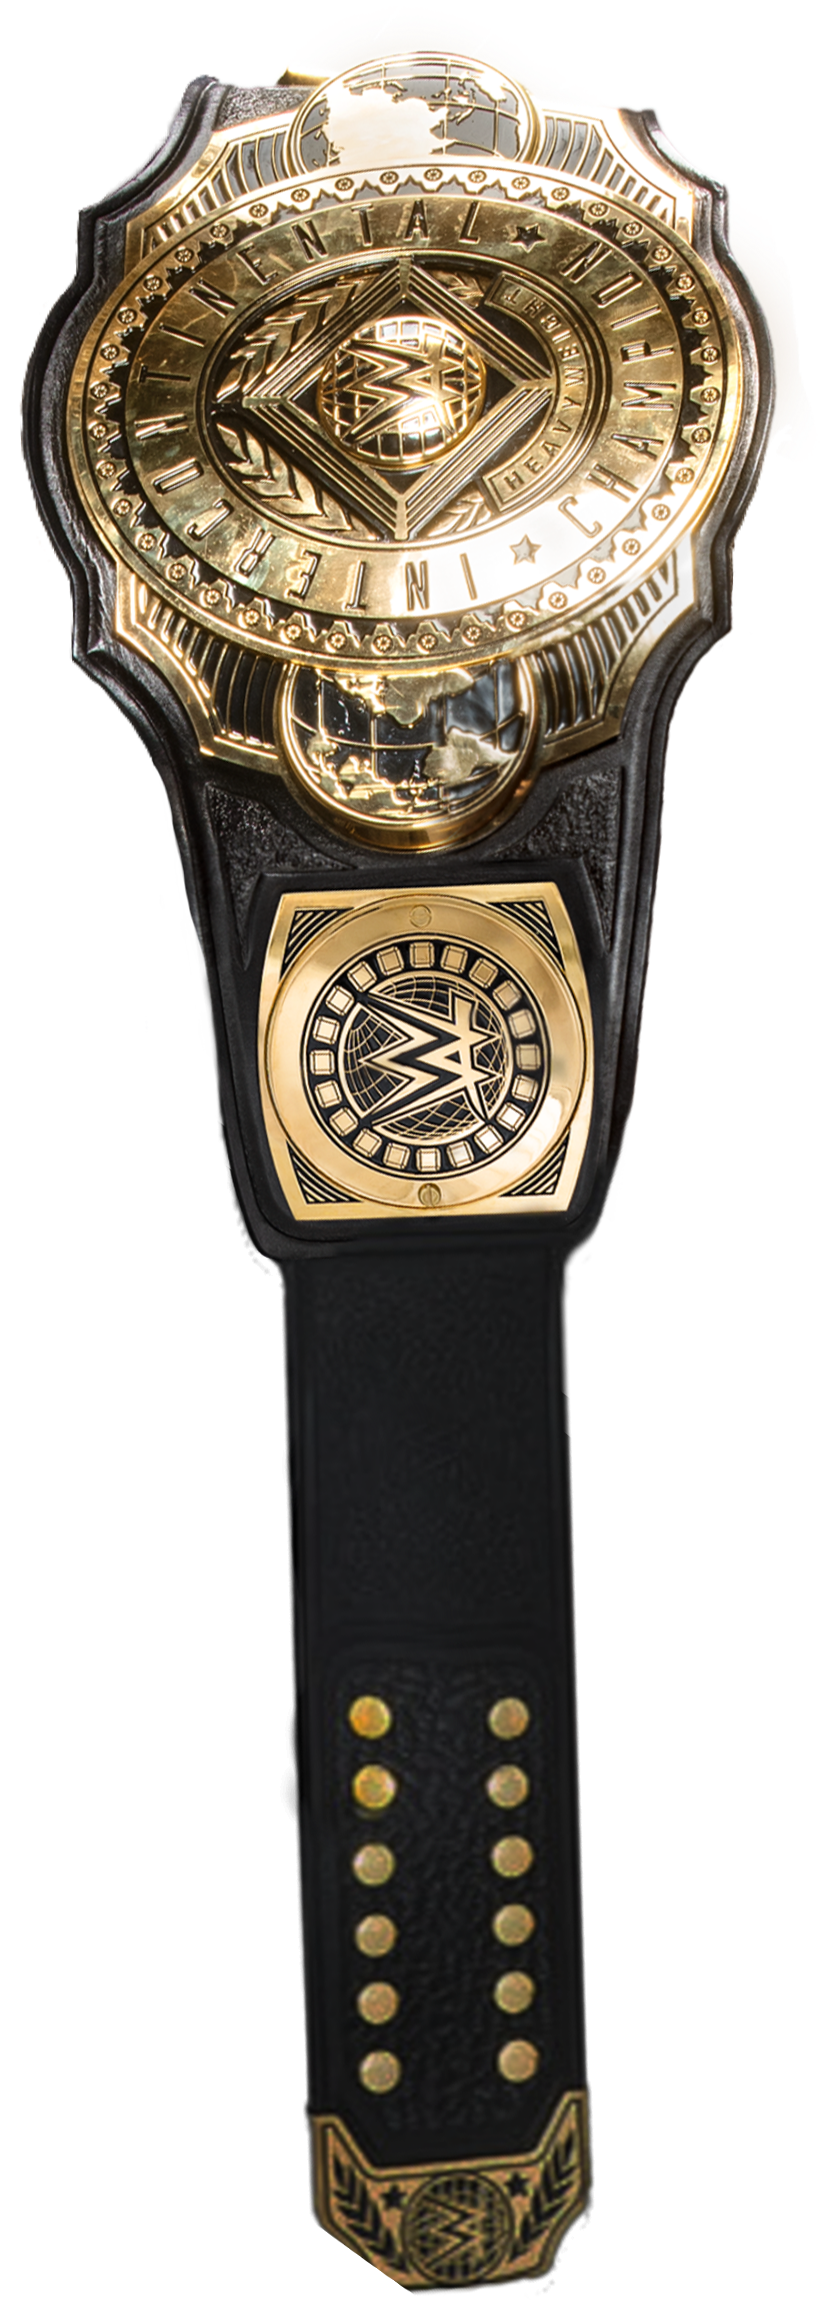 Ic Championship Title Render By Wwe Designers By Wwedesigners On Deviantart